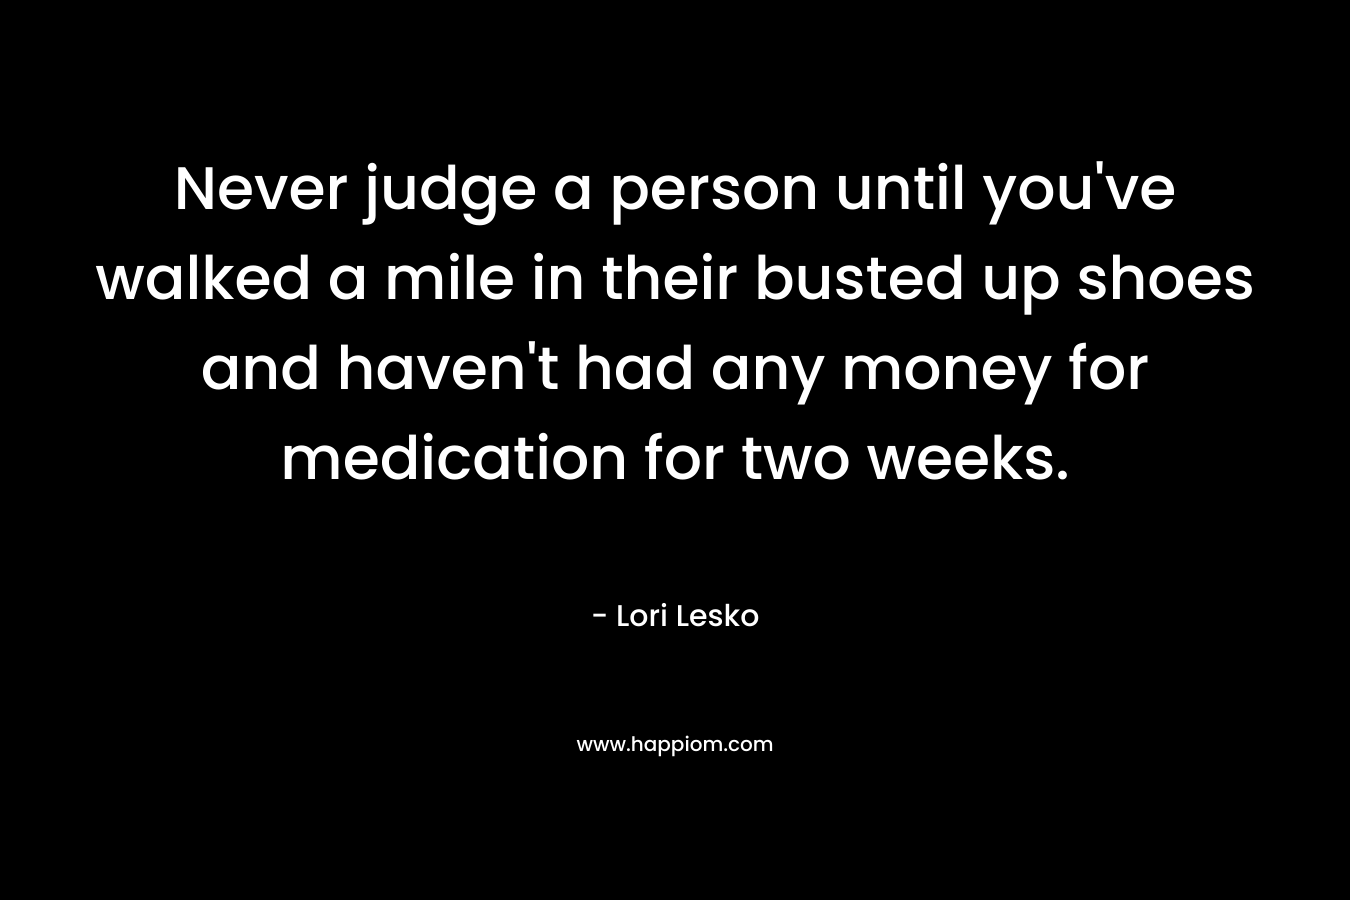 Never judge a person until you've walked a mile in their busted up shoes and haven't had any money for medication for two weeks.